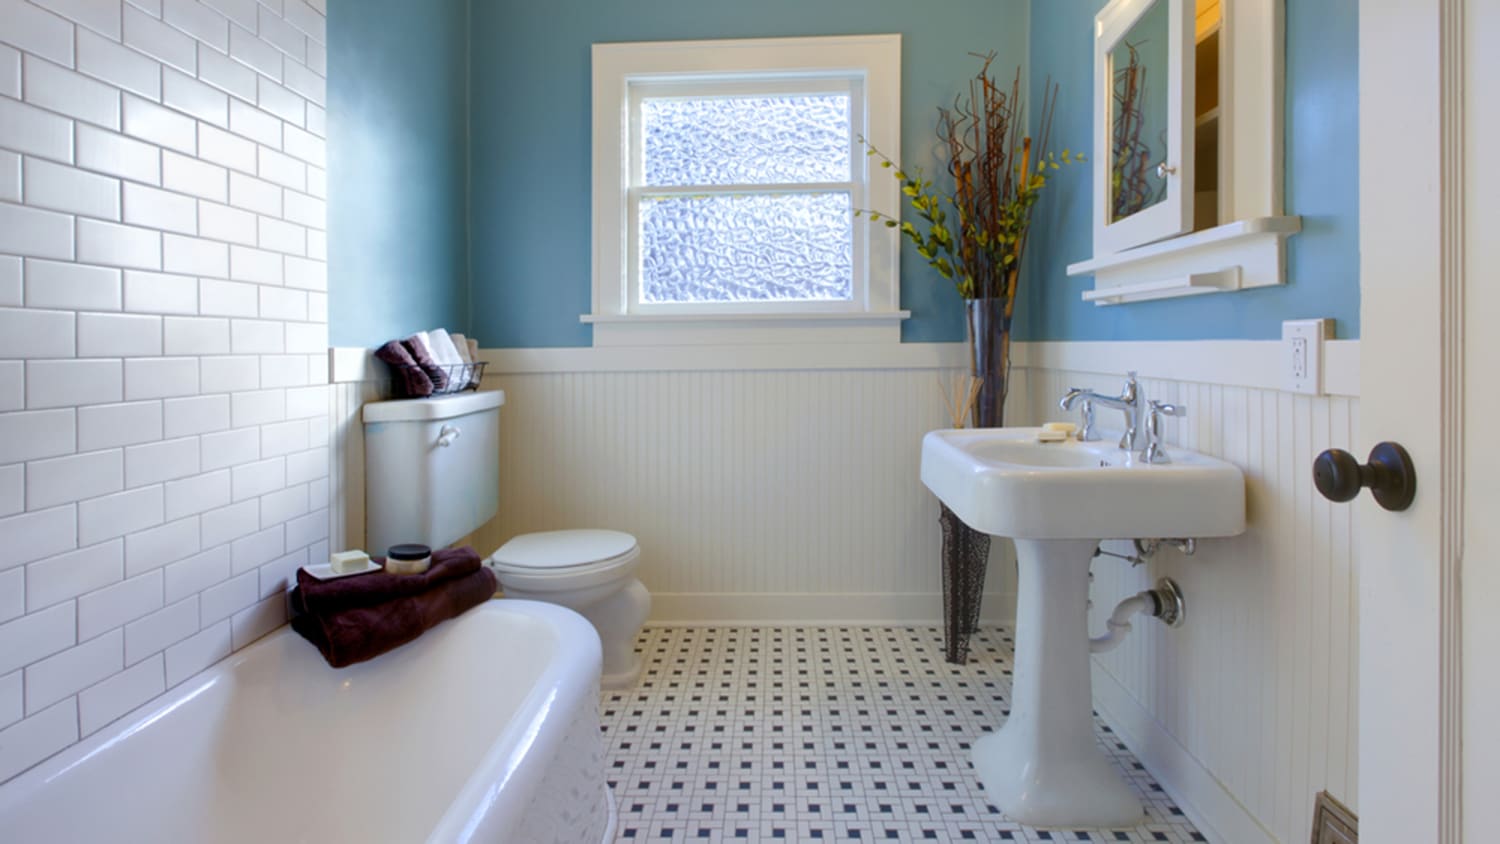 You Don't Need to Perform a Total Renovation to Give Your Bathroom New Life!